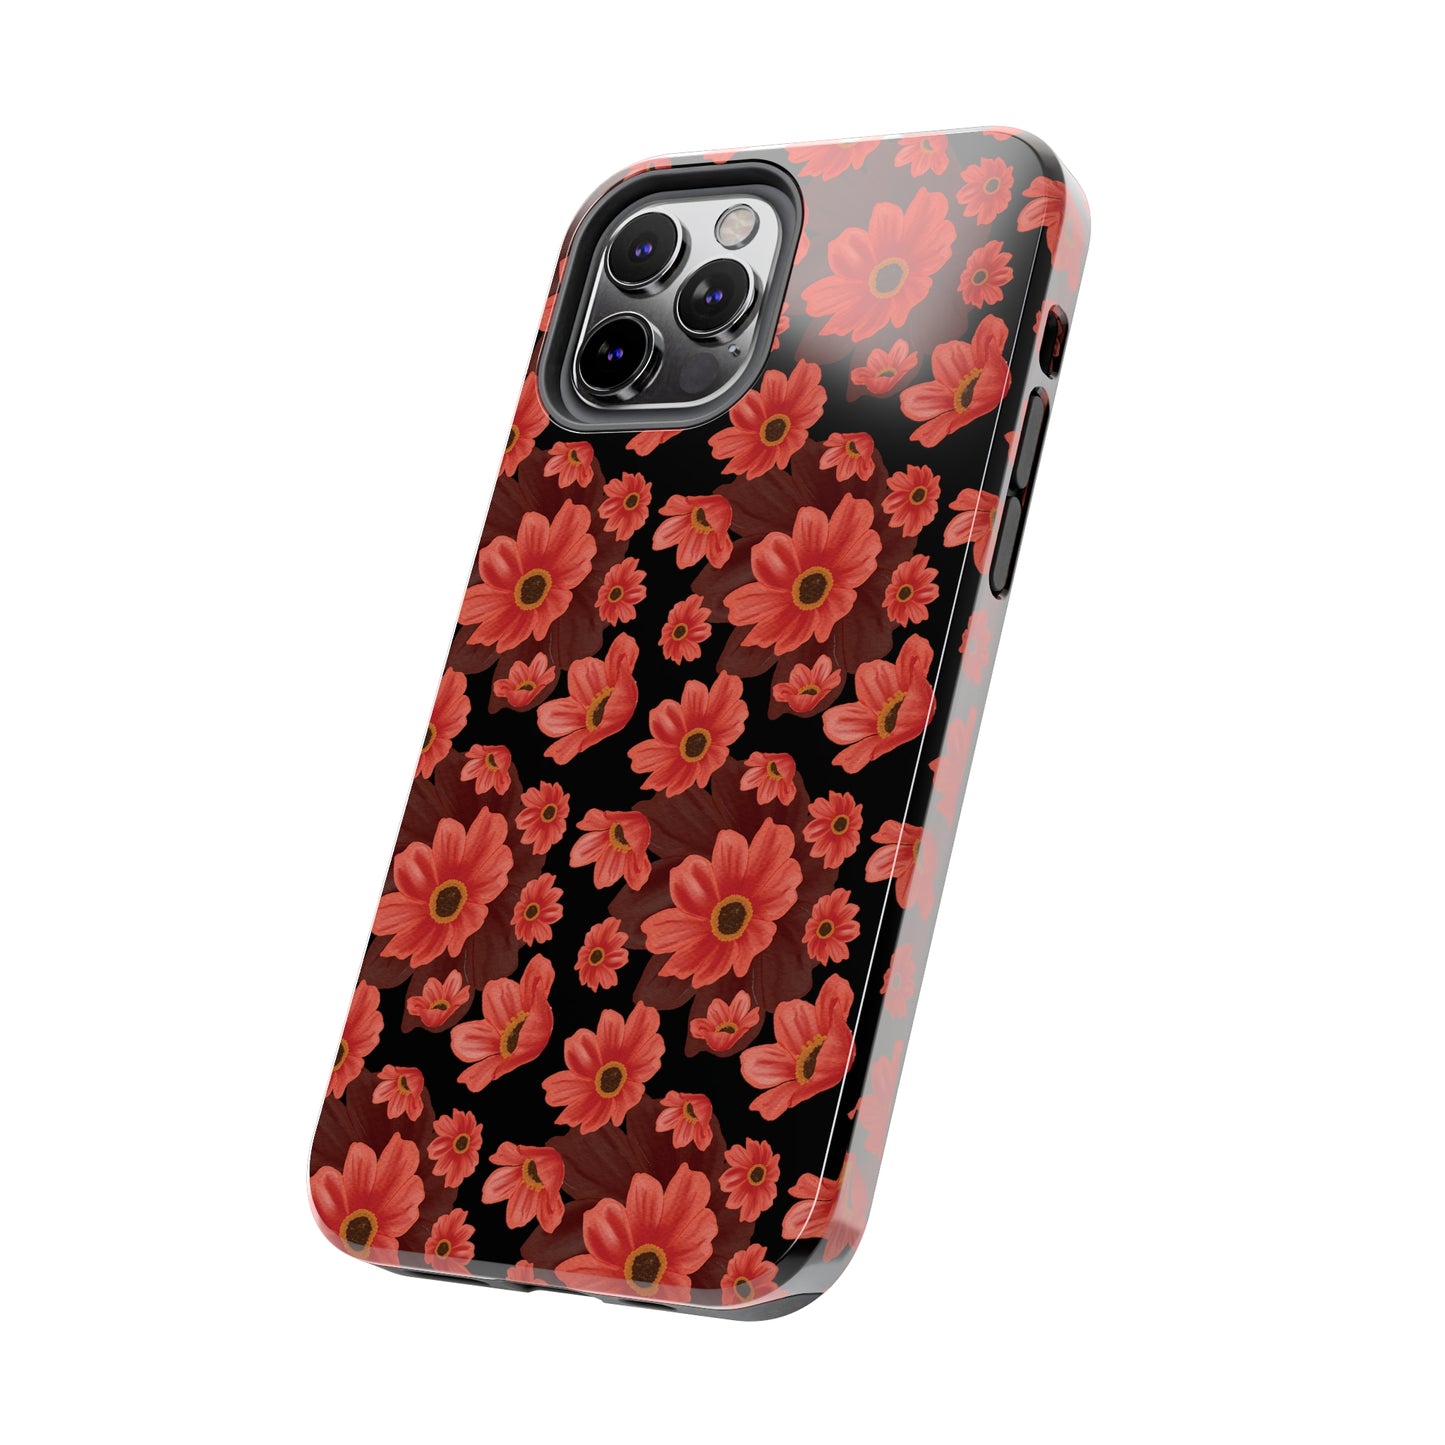 Large Red Flower Design Iphone Tough Phone Case